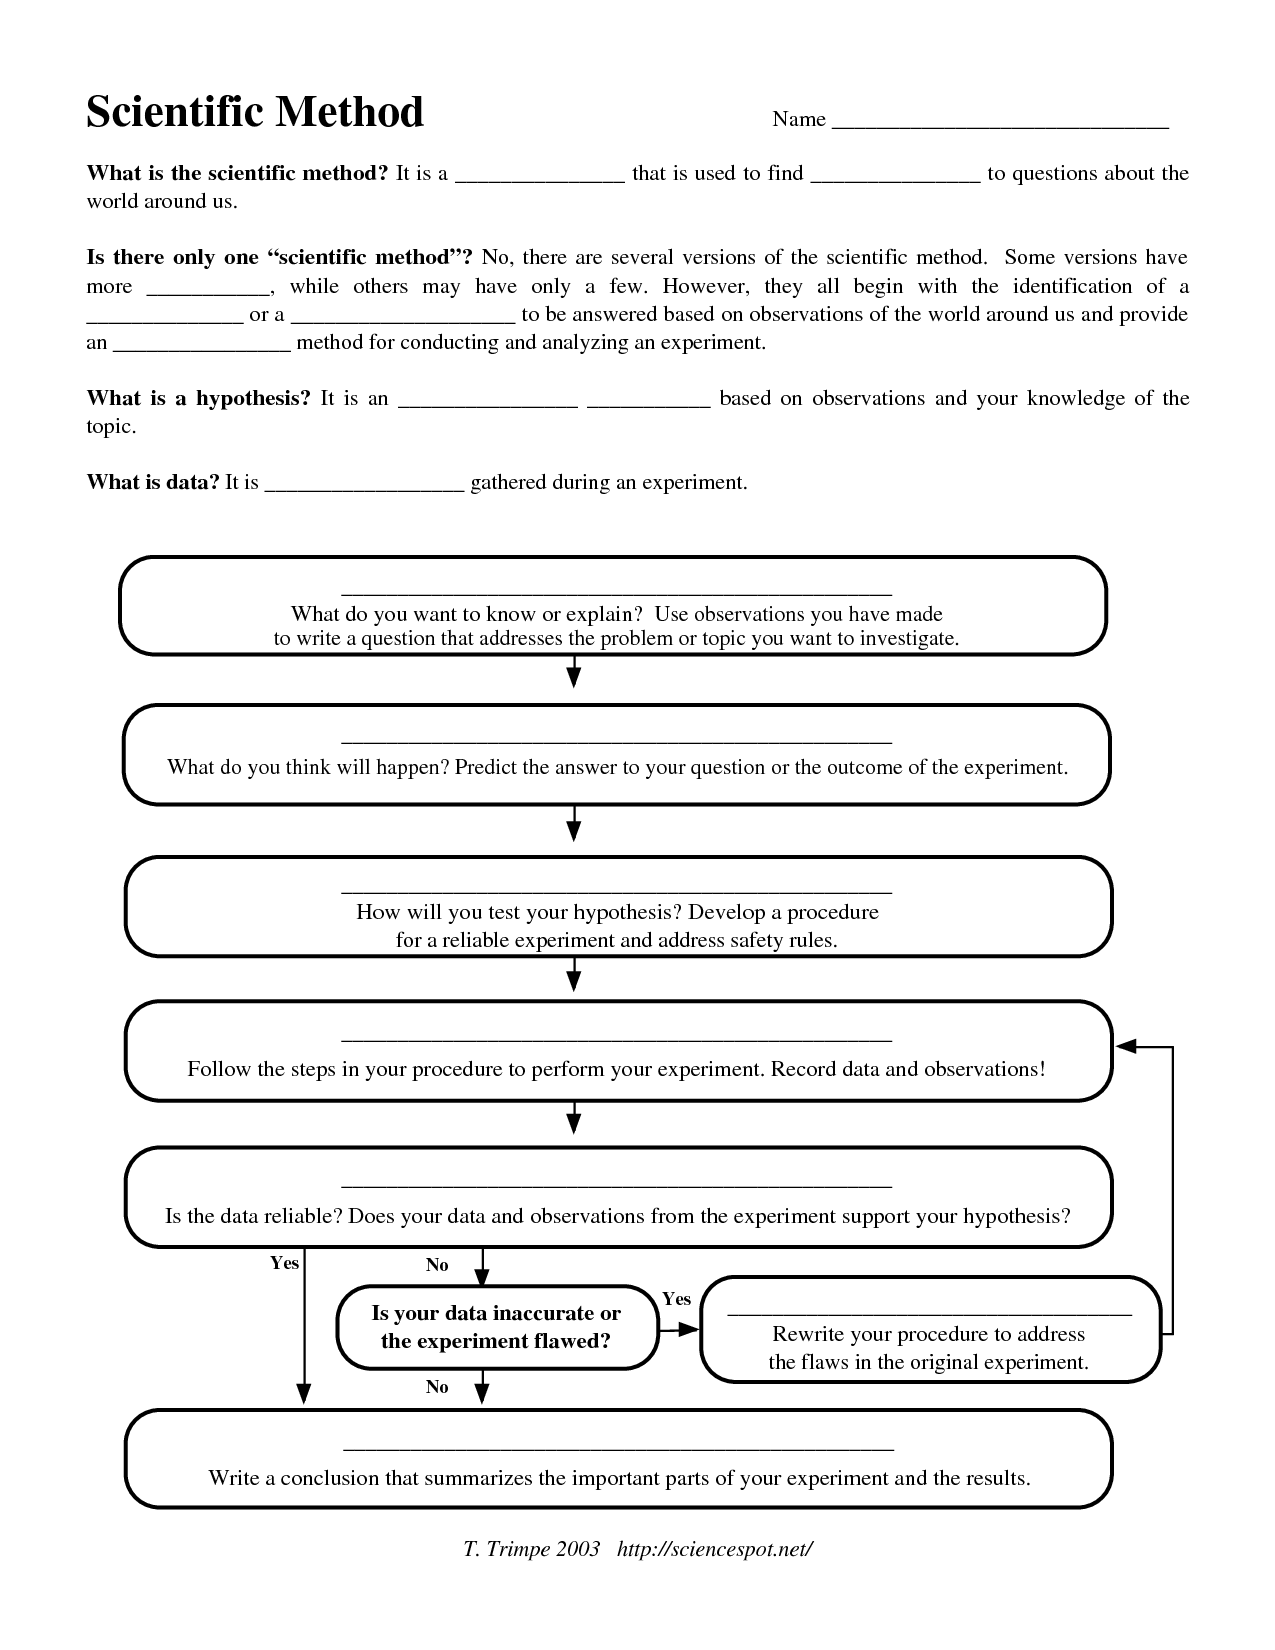 Practice With The Scientific Method Worksheet Answers Psychology